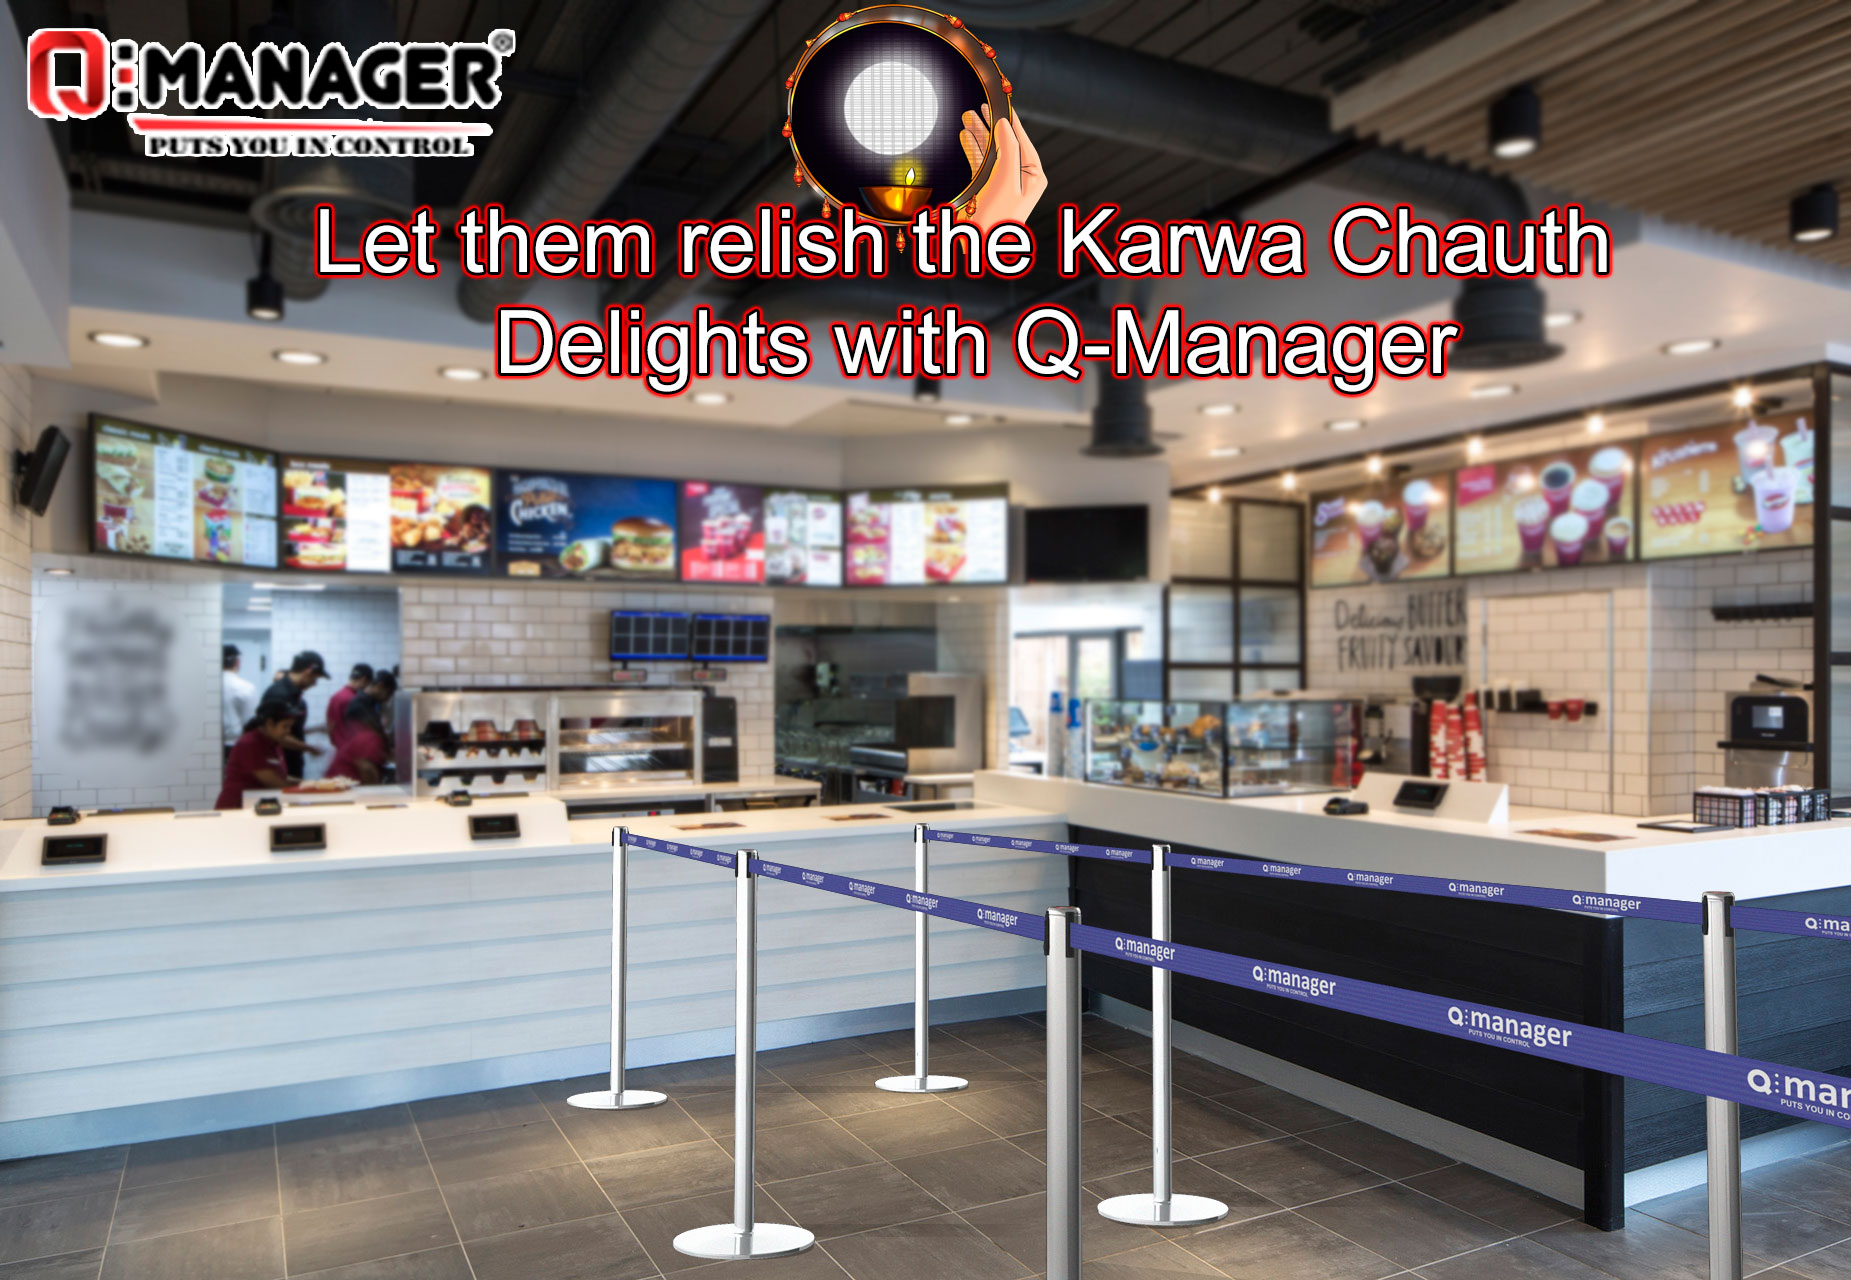 Let them relish the Karwa Chauth Delights with Q-Manager